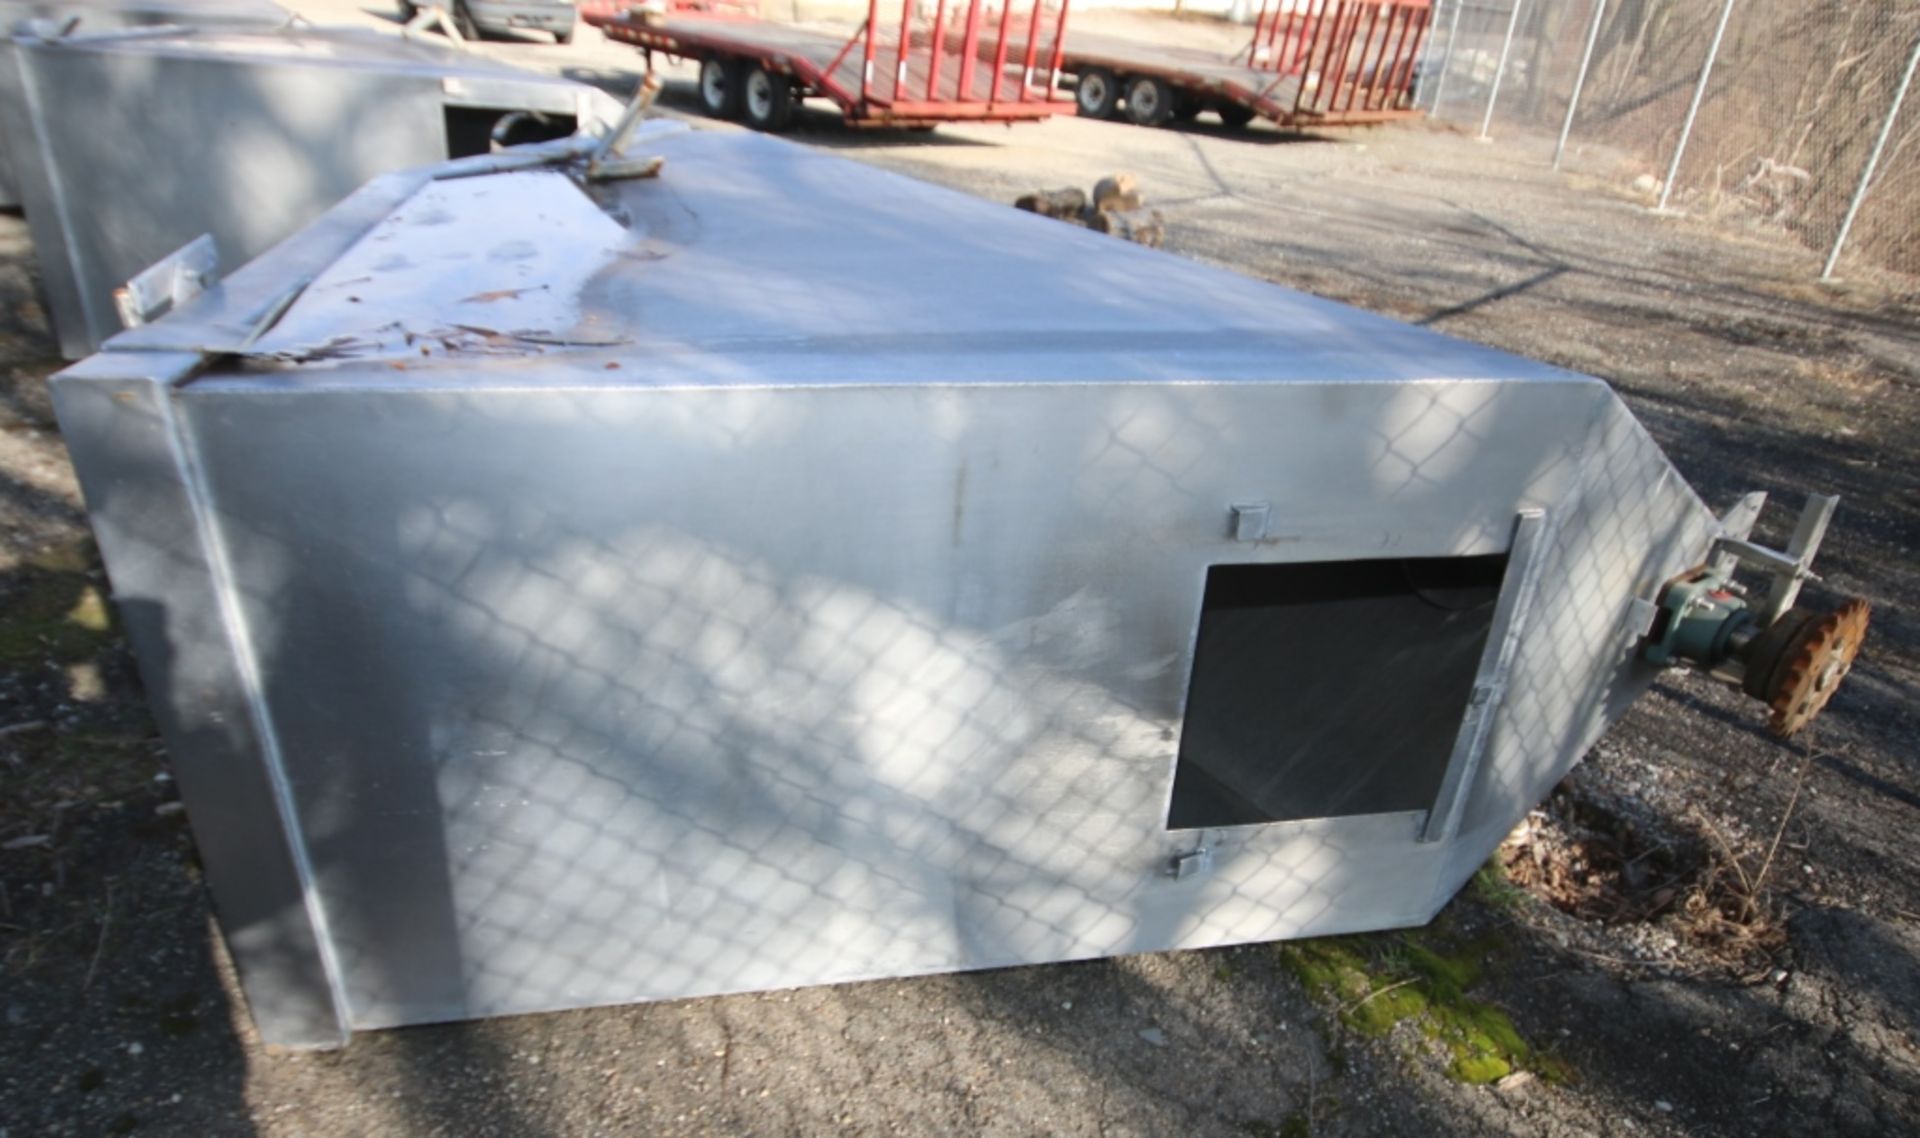 Aprox. 8 ft L x 37" W x 90" H S/S Auger Box with 12" S/S Auger (INV#77749)(Located @ the MDG - Image 4 of 4